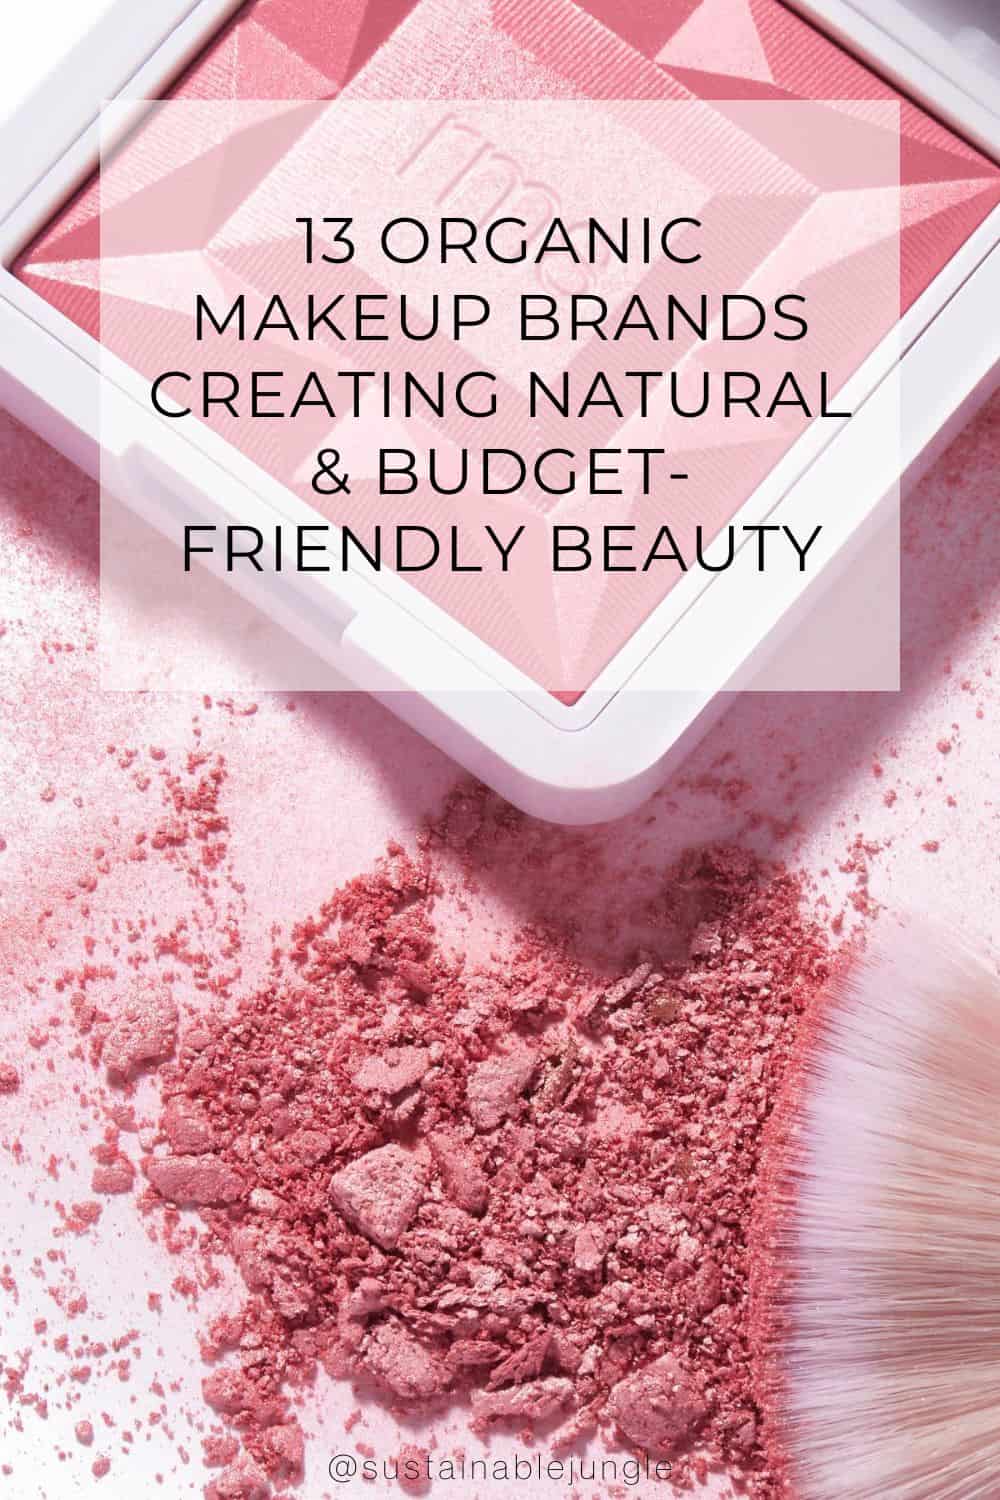 13 Organic Makeup Brands Creating Natural & Budget-Friendly Beauty Image by RMS Beauty #organicmakeupbrands #naturalmakeupbrands #bestorganicmakeupbrands #affordableorganicmakeup #inexpensivenaturalmakeup #bestallnautralmakeupbrands #sustainablejungle